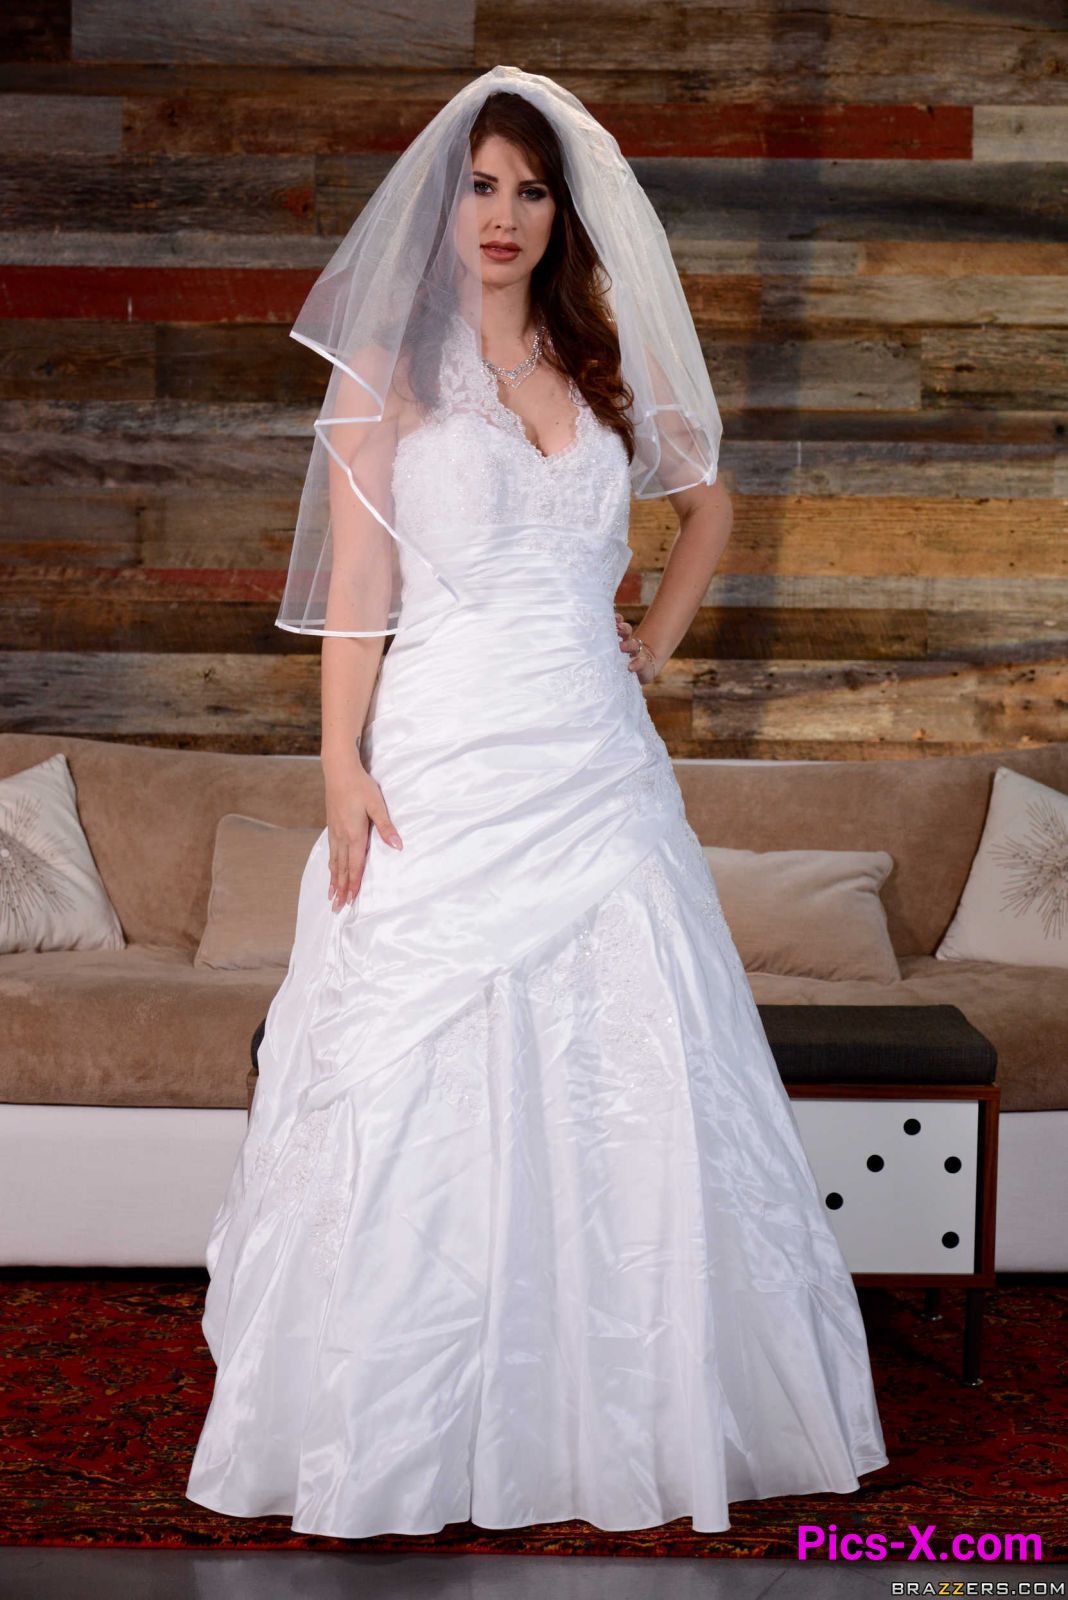 Say Yes To Getting Fucked In Your Wedding Dress - Real Wife Stories - Image 1